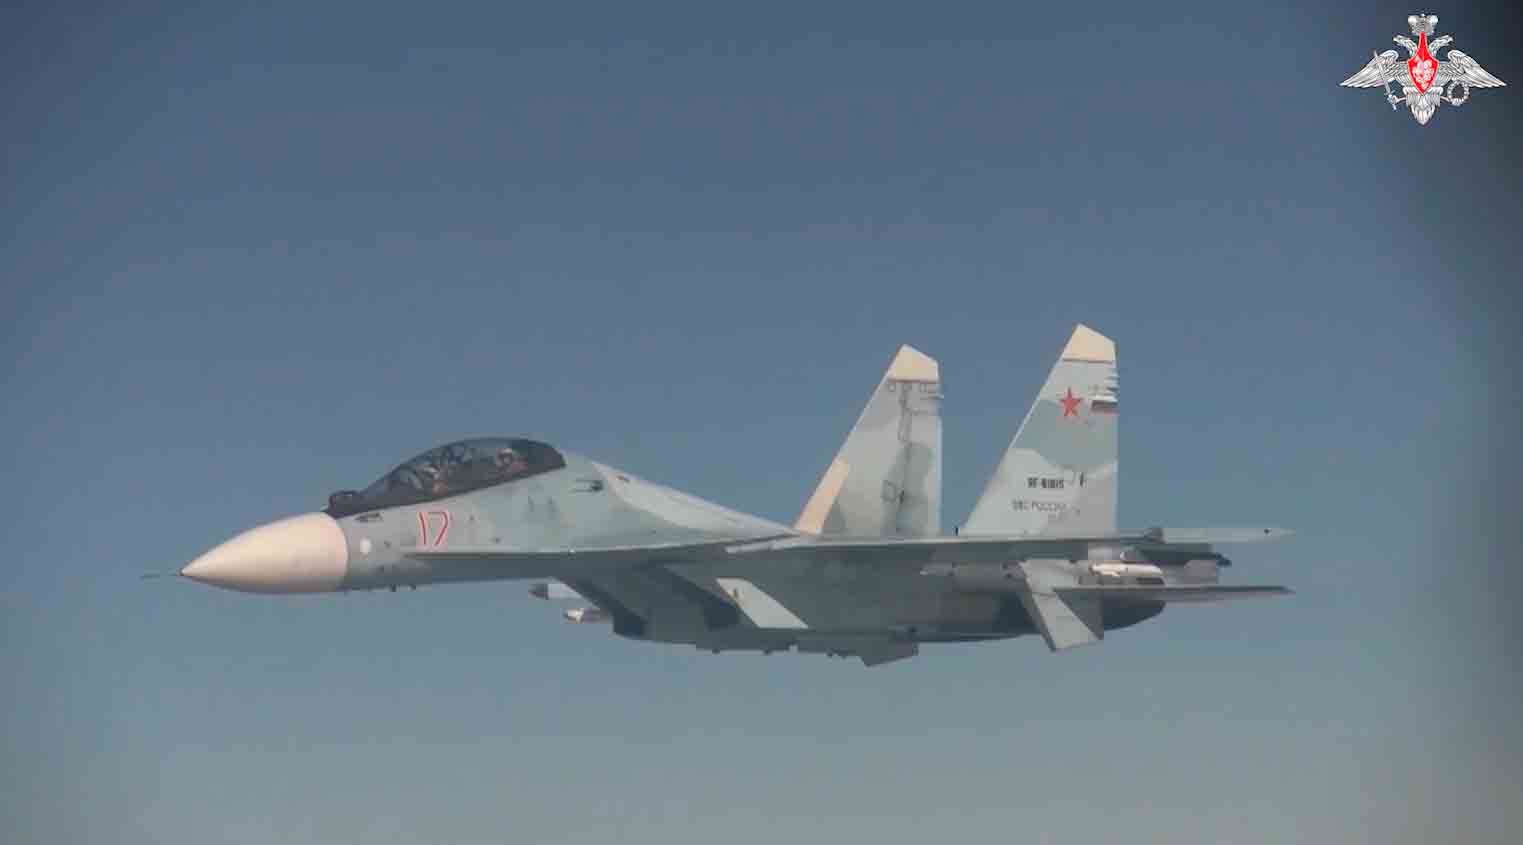 The images reveal that the bombers were escorted by Russian Su-35S and Su-30SM fighters